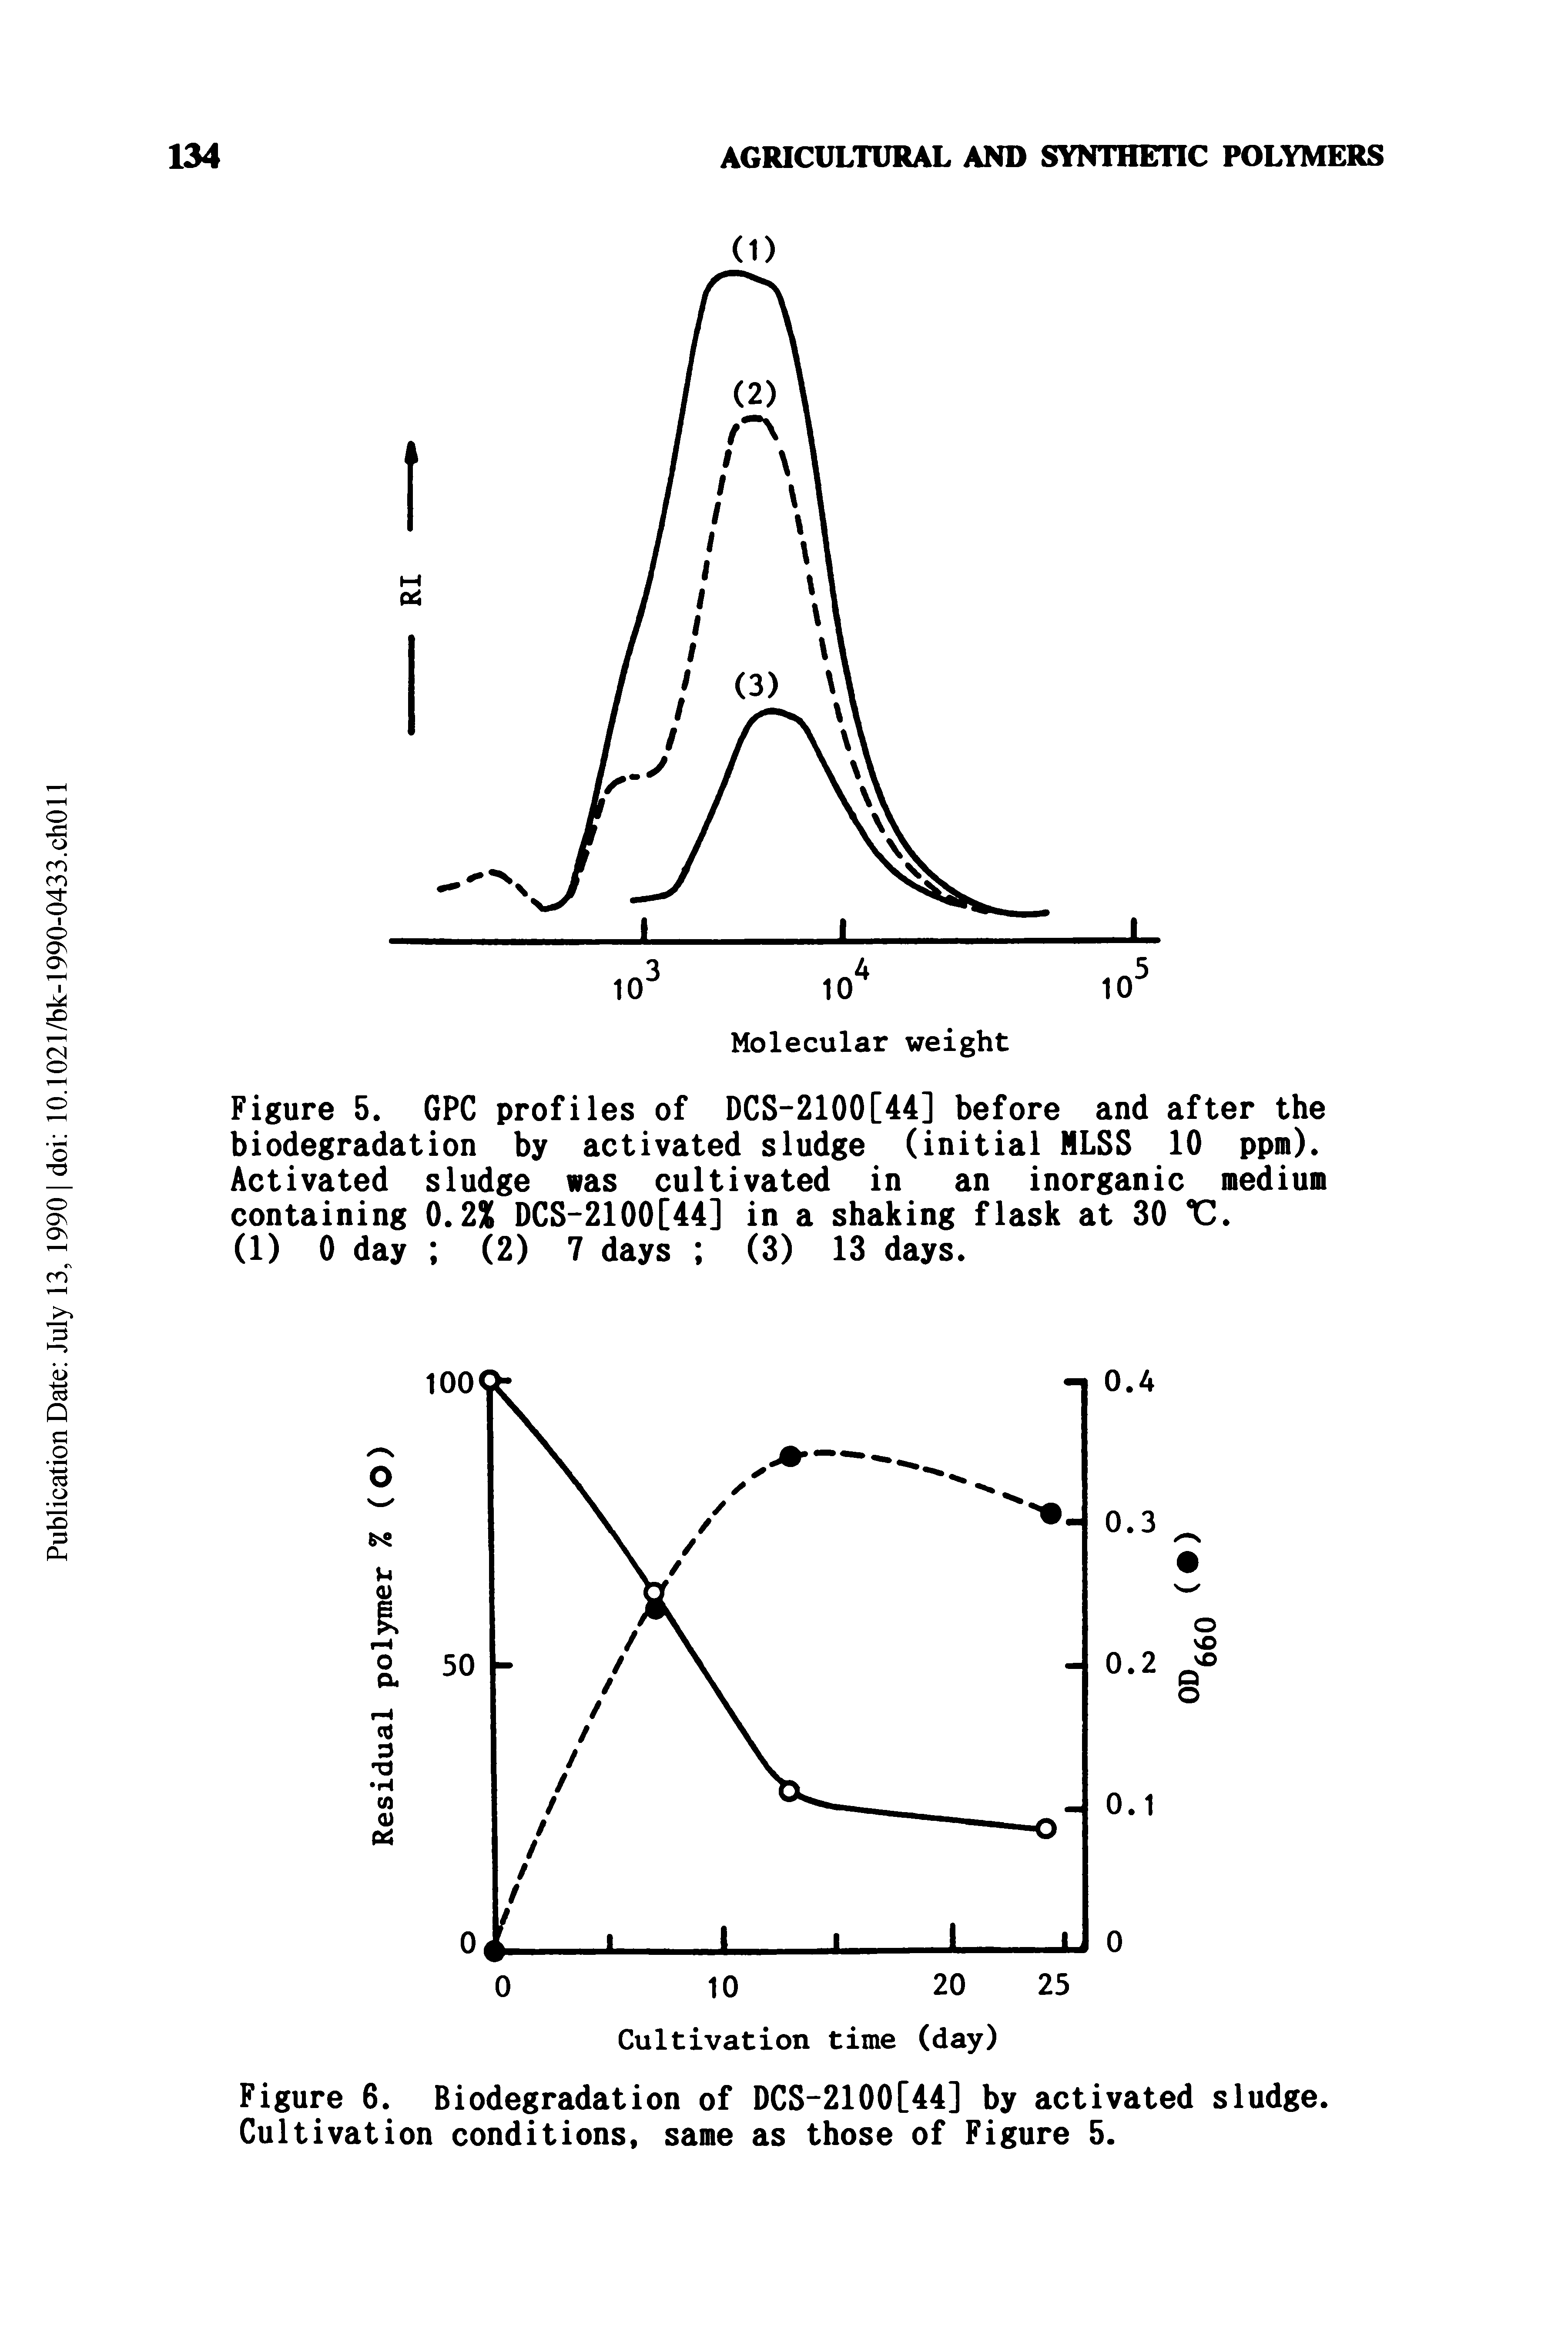 Figure 5. GPC profiles of DCS-2100[44] before and after the biodegradation by activated sludge (initial MLSS 10 ppm). Activated sludge was cultivated in an inorganic medium containing 0.2X DCS-2100[44] in a shaking flask at 30 "C.